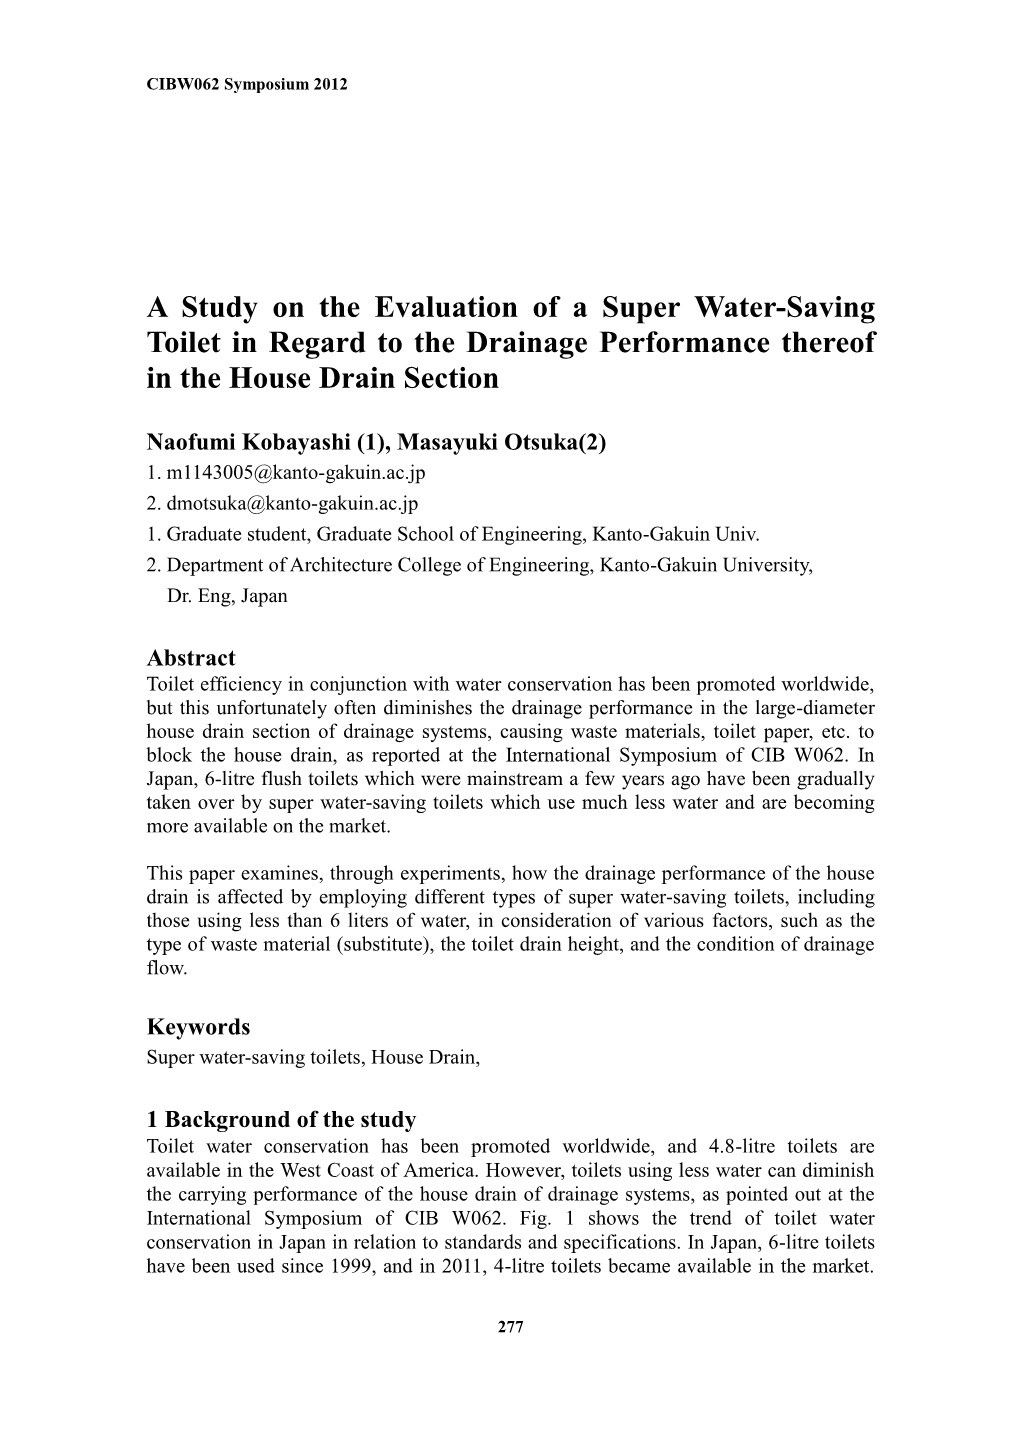 A Study on the Evaluation of a Super Water-Saving Toilet in Regard to the Drainage Performance Thereof in the House Drain Section